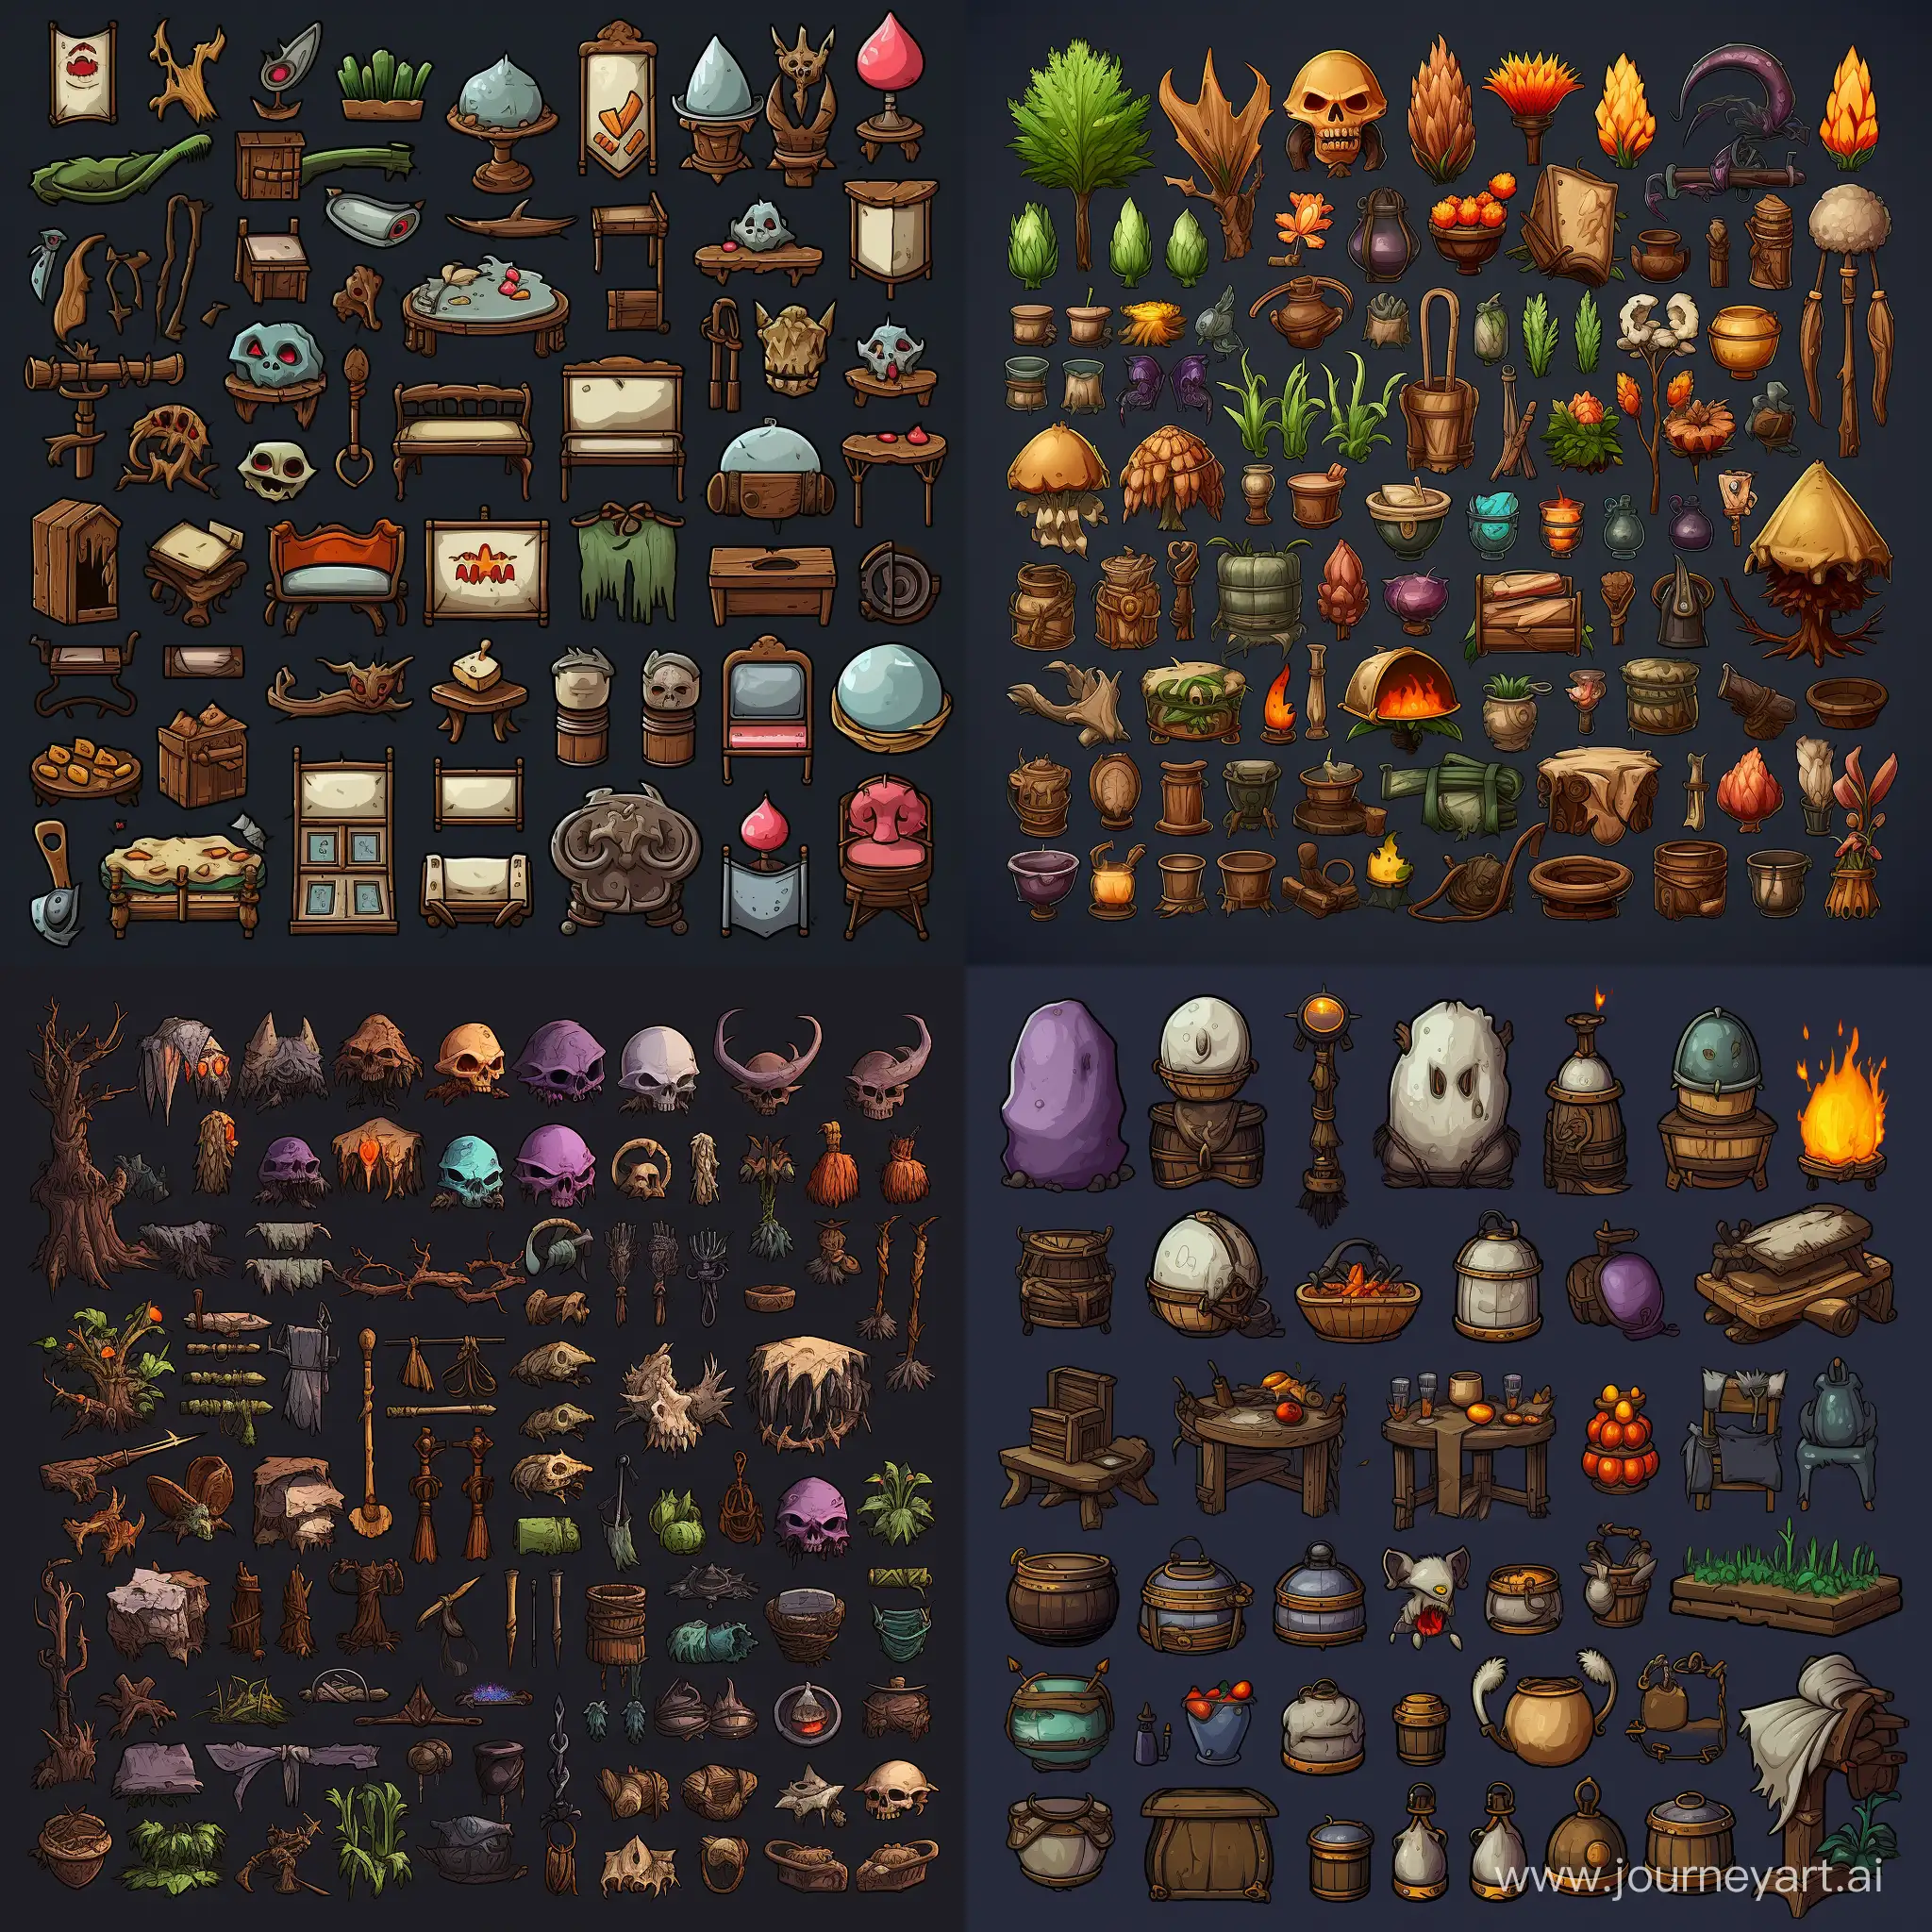 HighQuality-11-Item-Spritesheet-with-Diverse-Items